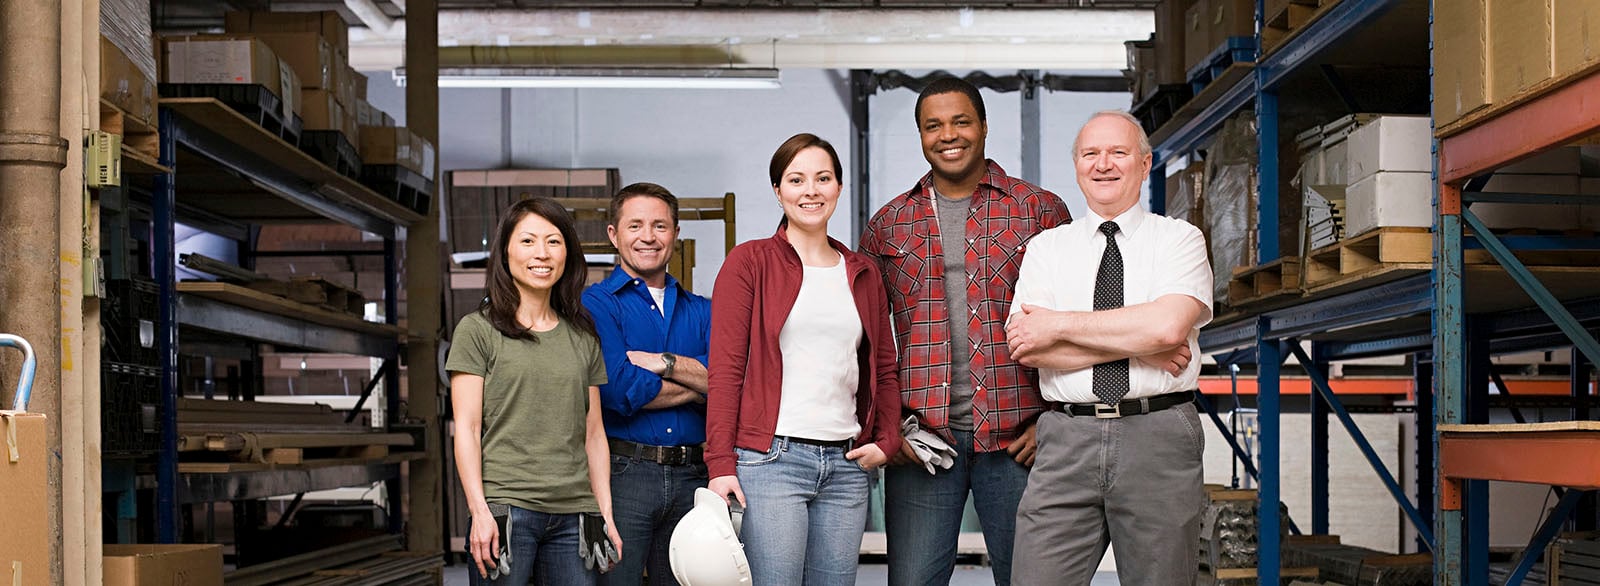 Group photo of workers in a warehouse